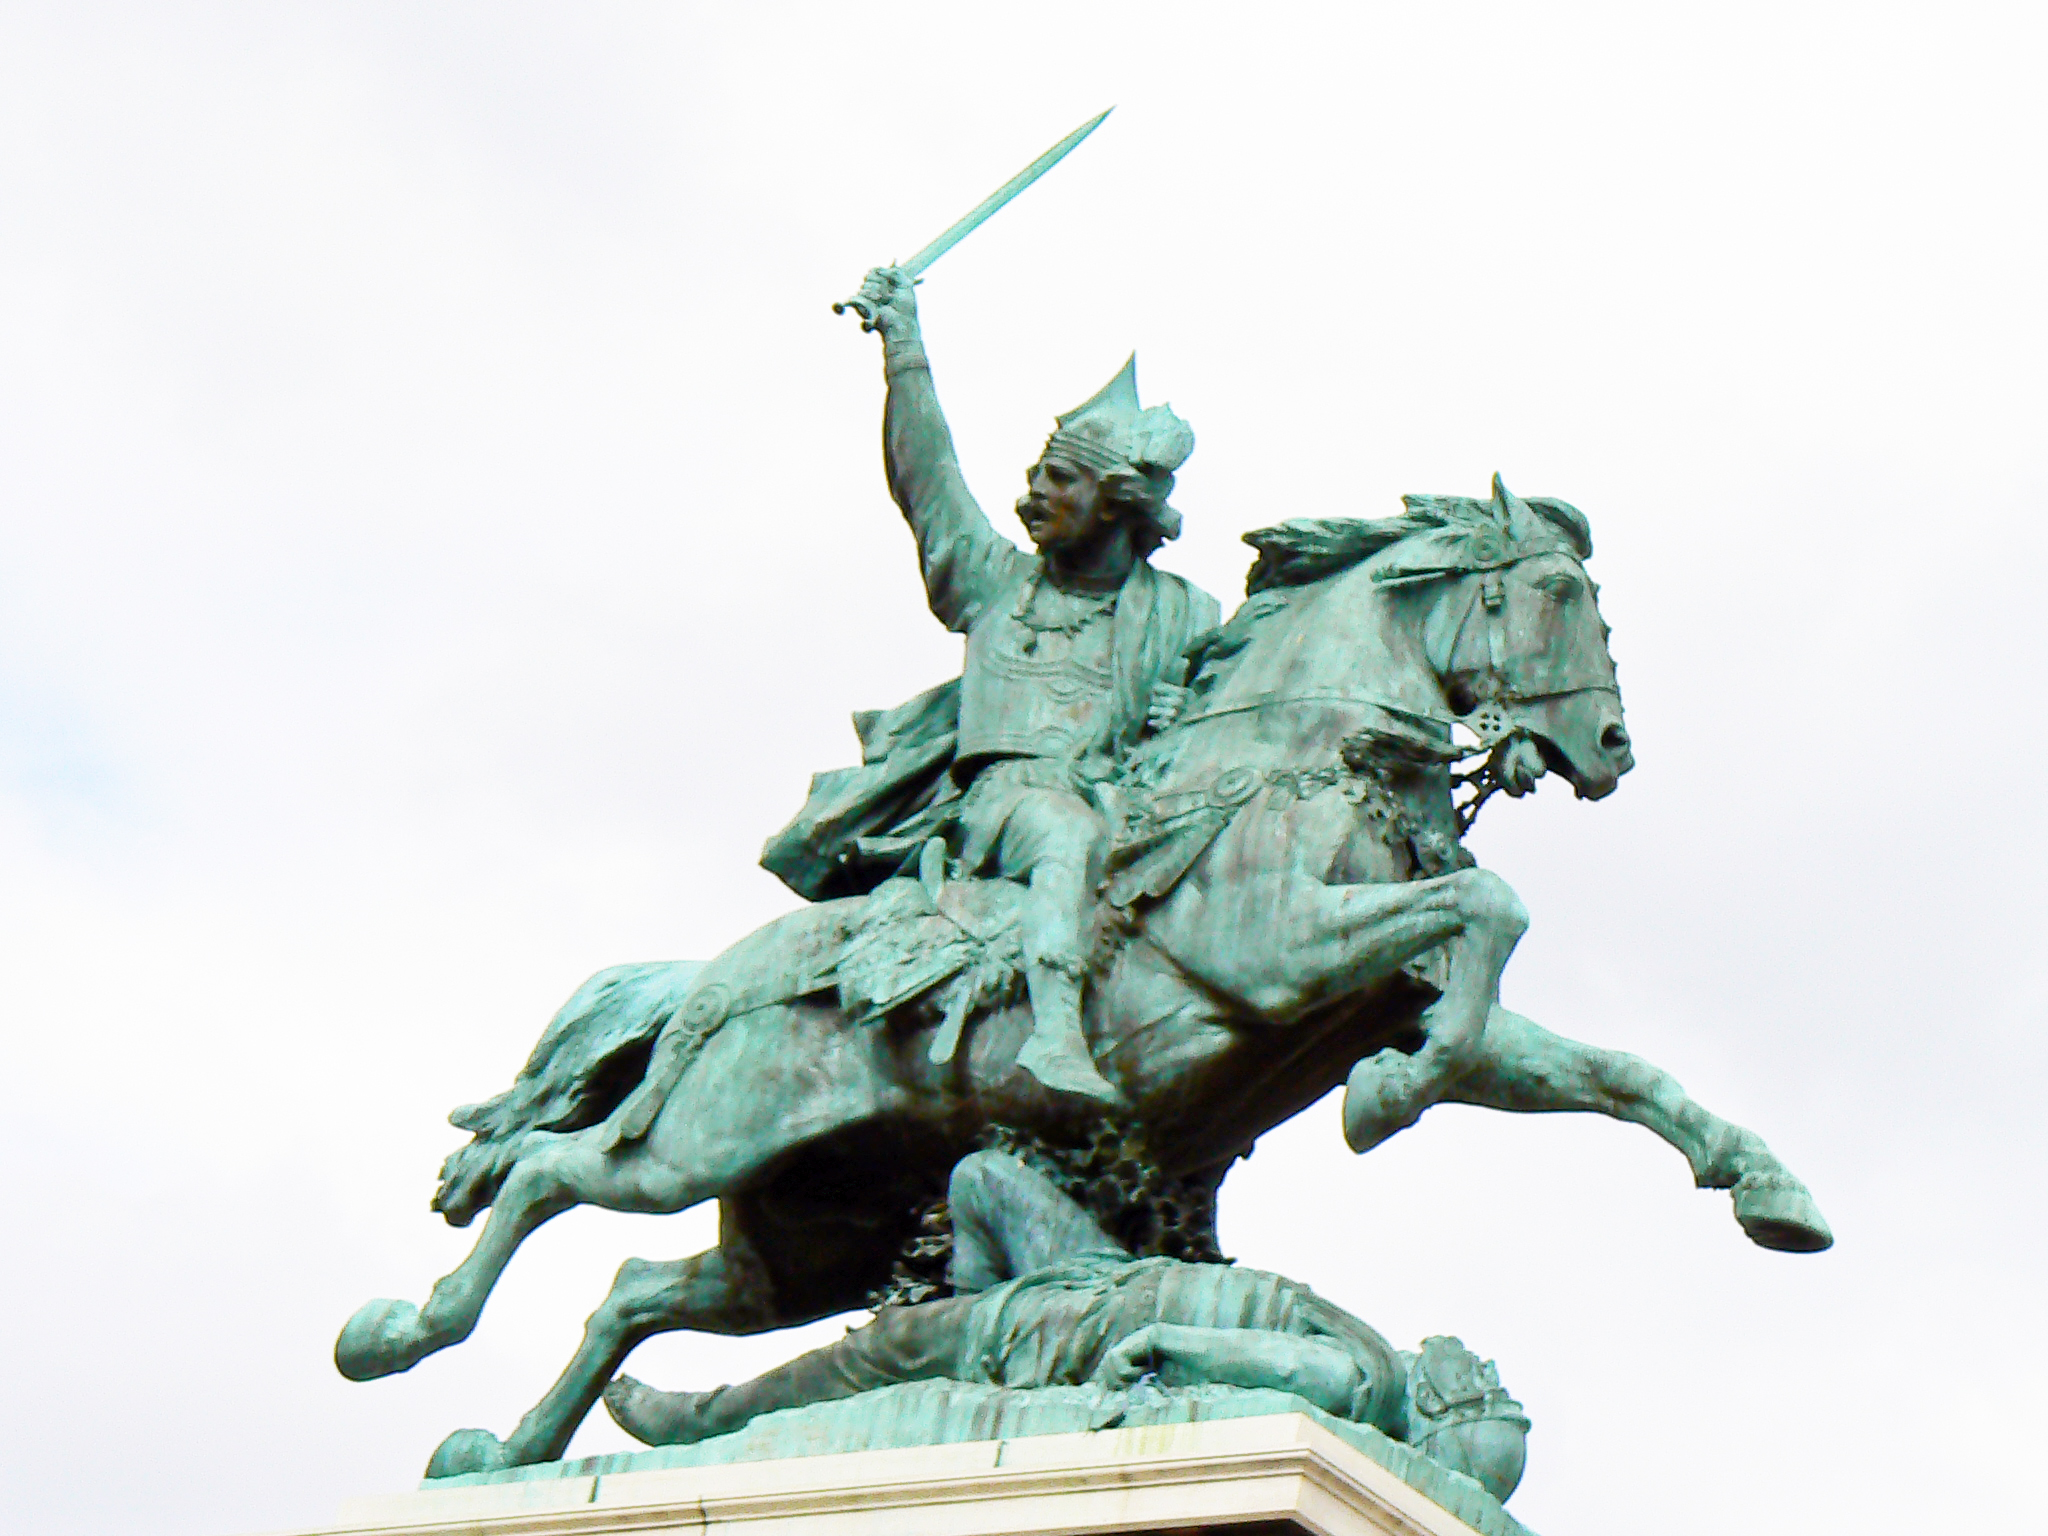 the statue is holding a sword as it stands on a horse